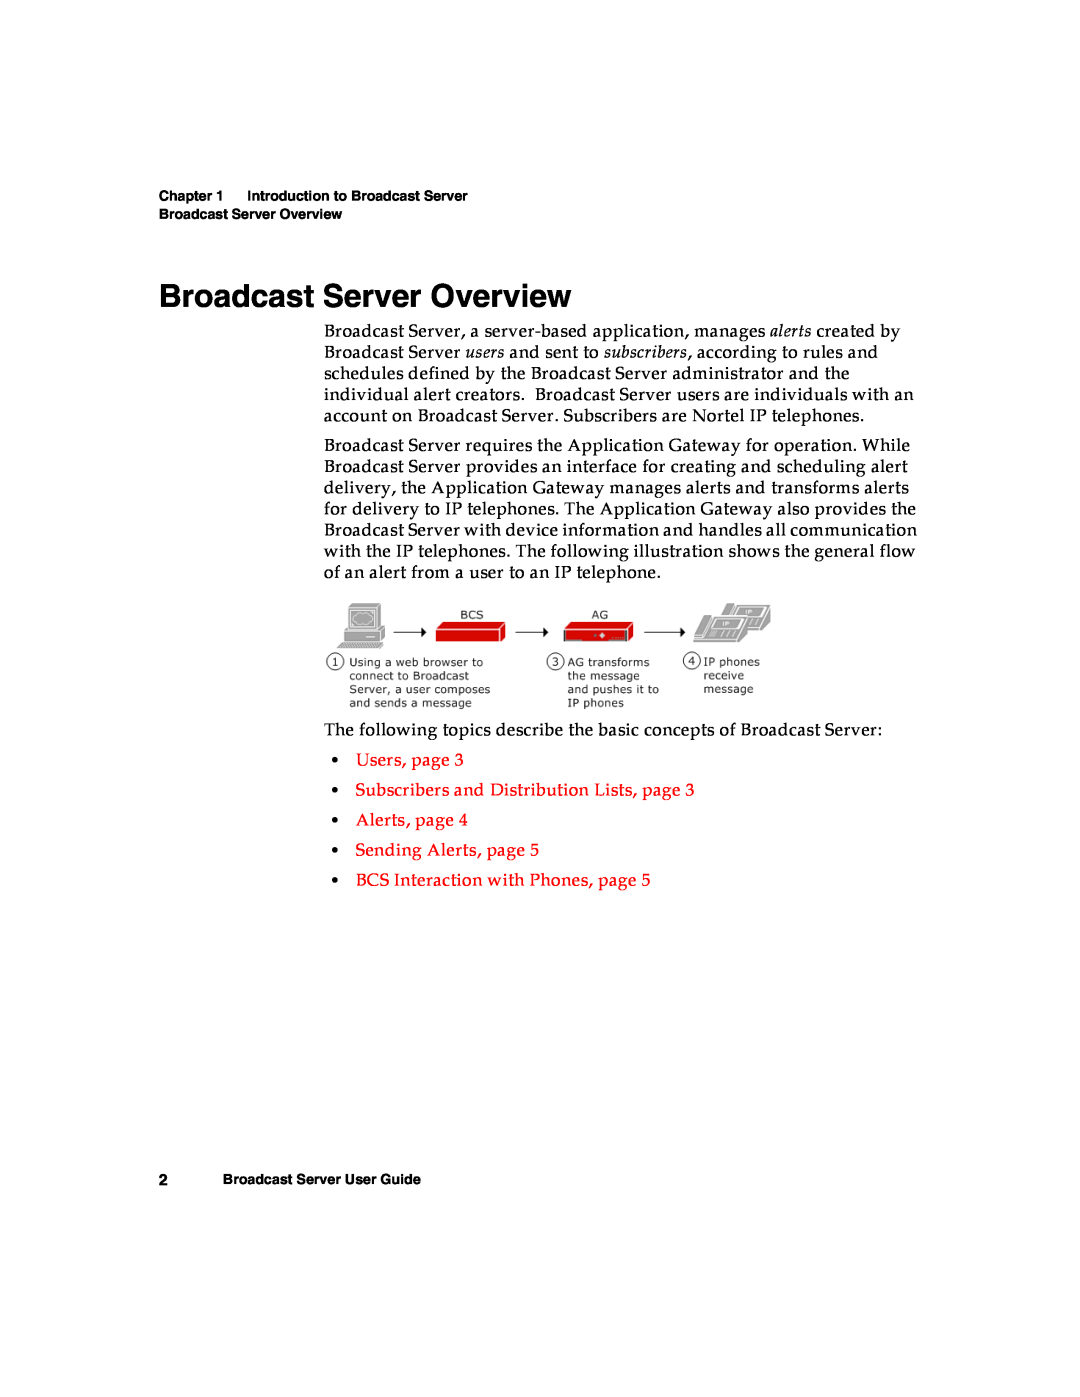 Nortel Networks warranty Broadcast Server Overview, Users, page Subscribers and Distribution Lists, page Alerts, page 